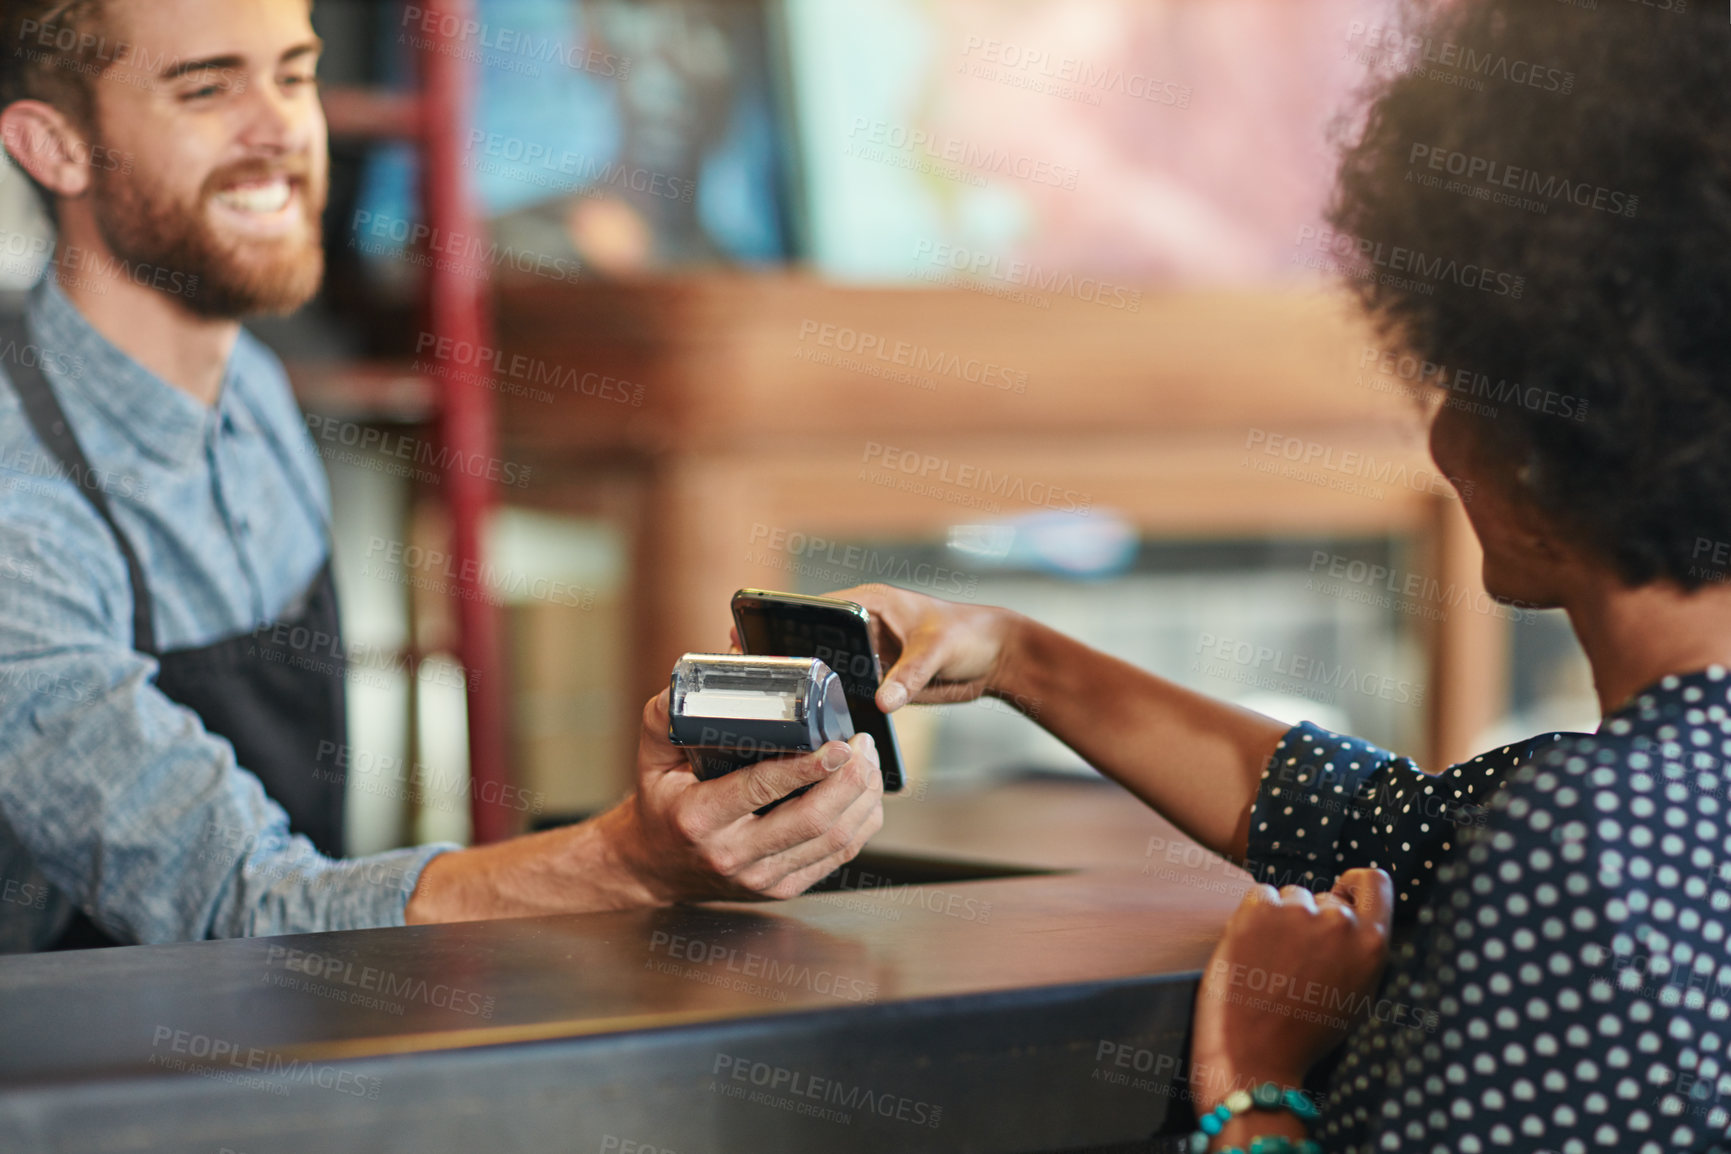 Buy stock photo Shot of a barista taking a smartphone payment from a customer at a cafe